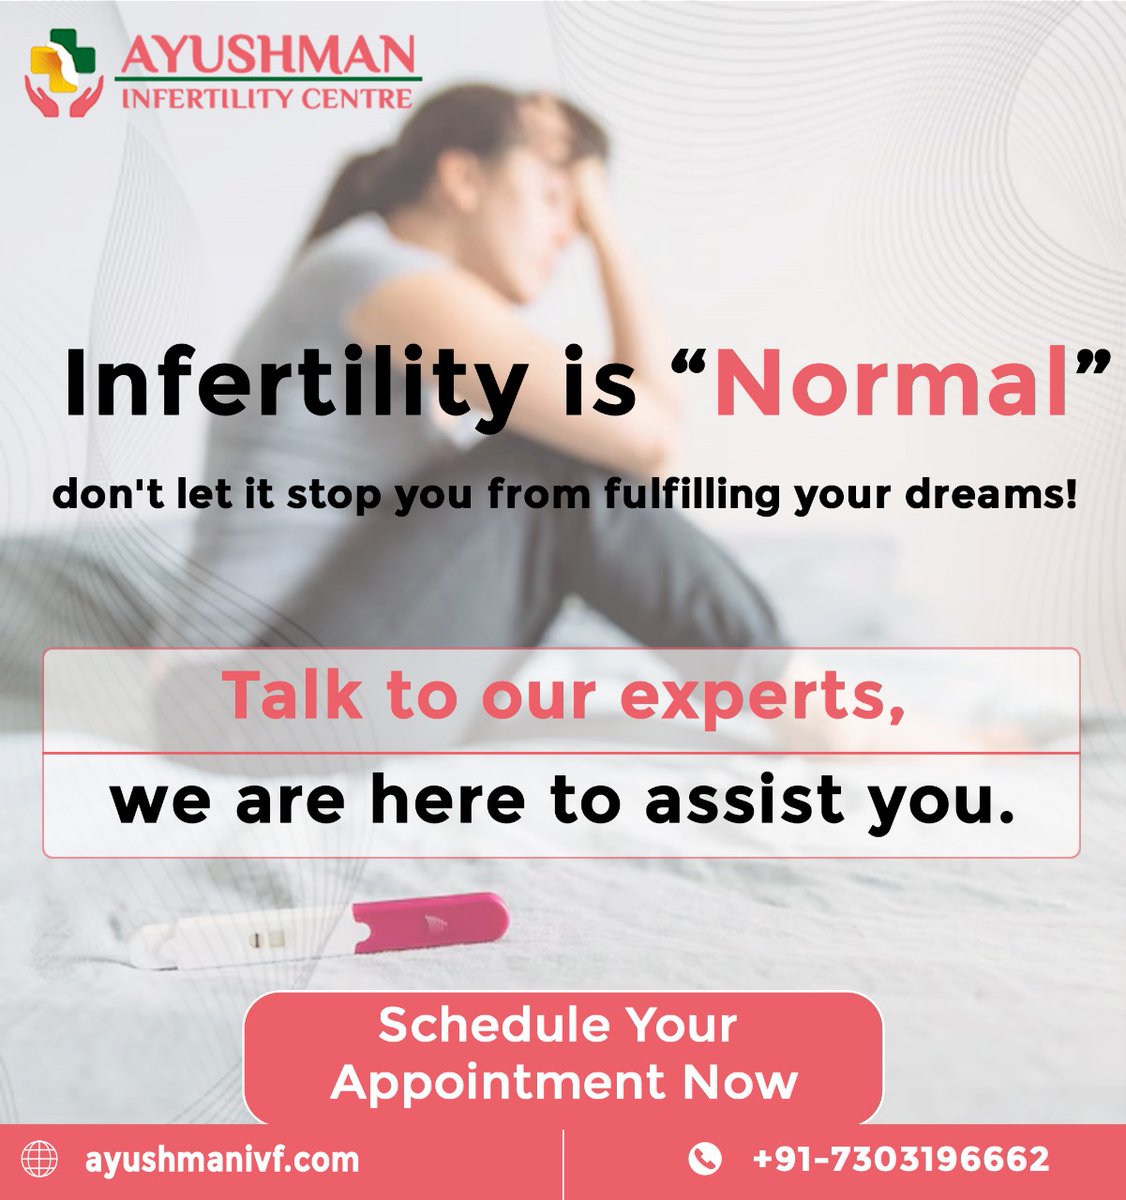 Wishing to start a family? Ayushman Infertility Centre offers personalized fertility treatments.  Book a consultation today!
.
.
.
.
#fertility #treatment #fertilitytreatment #pregnancytreatment #fertilitysupport #fertilitytips #ivfhope #infertility #ayushmancentreofexcellence